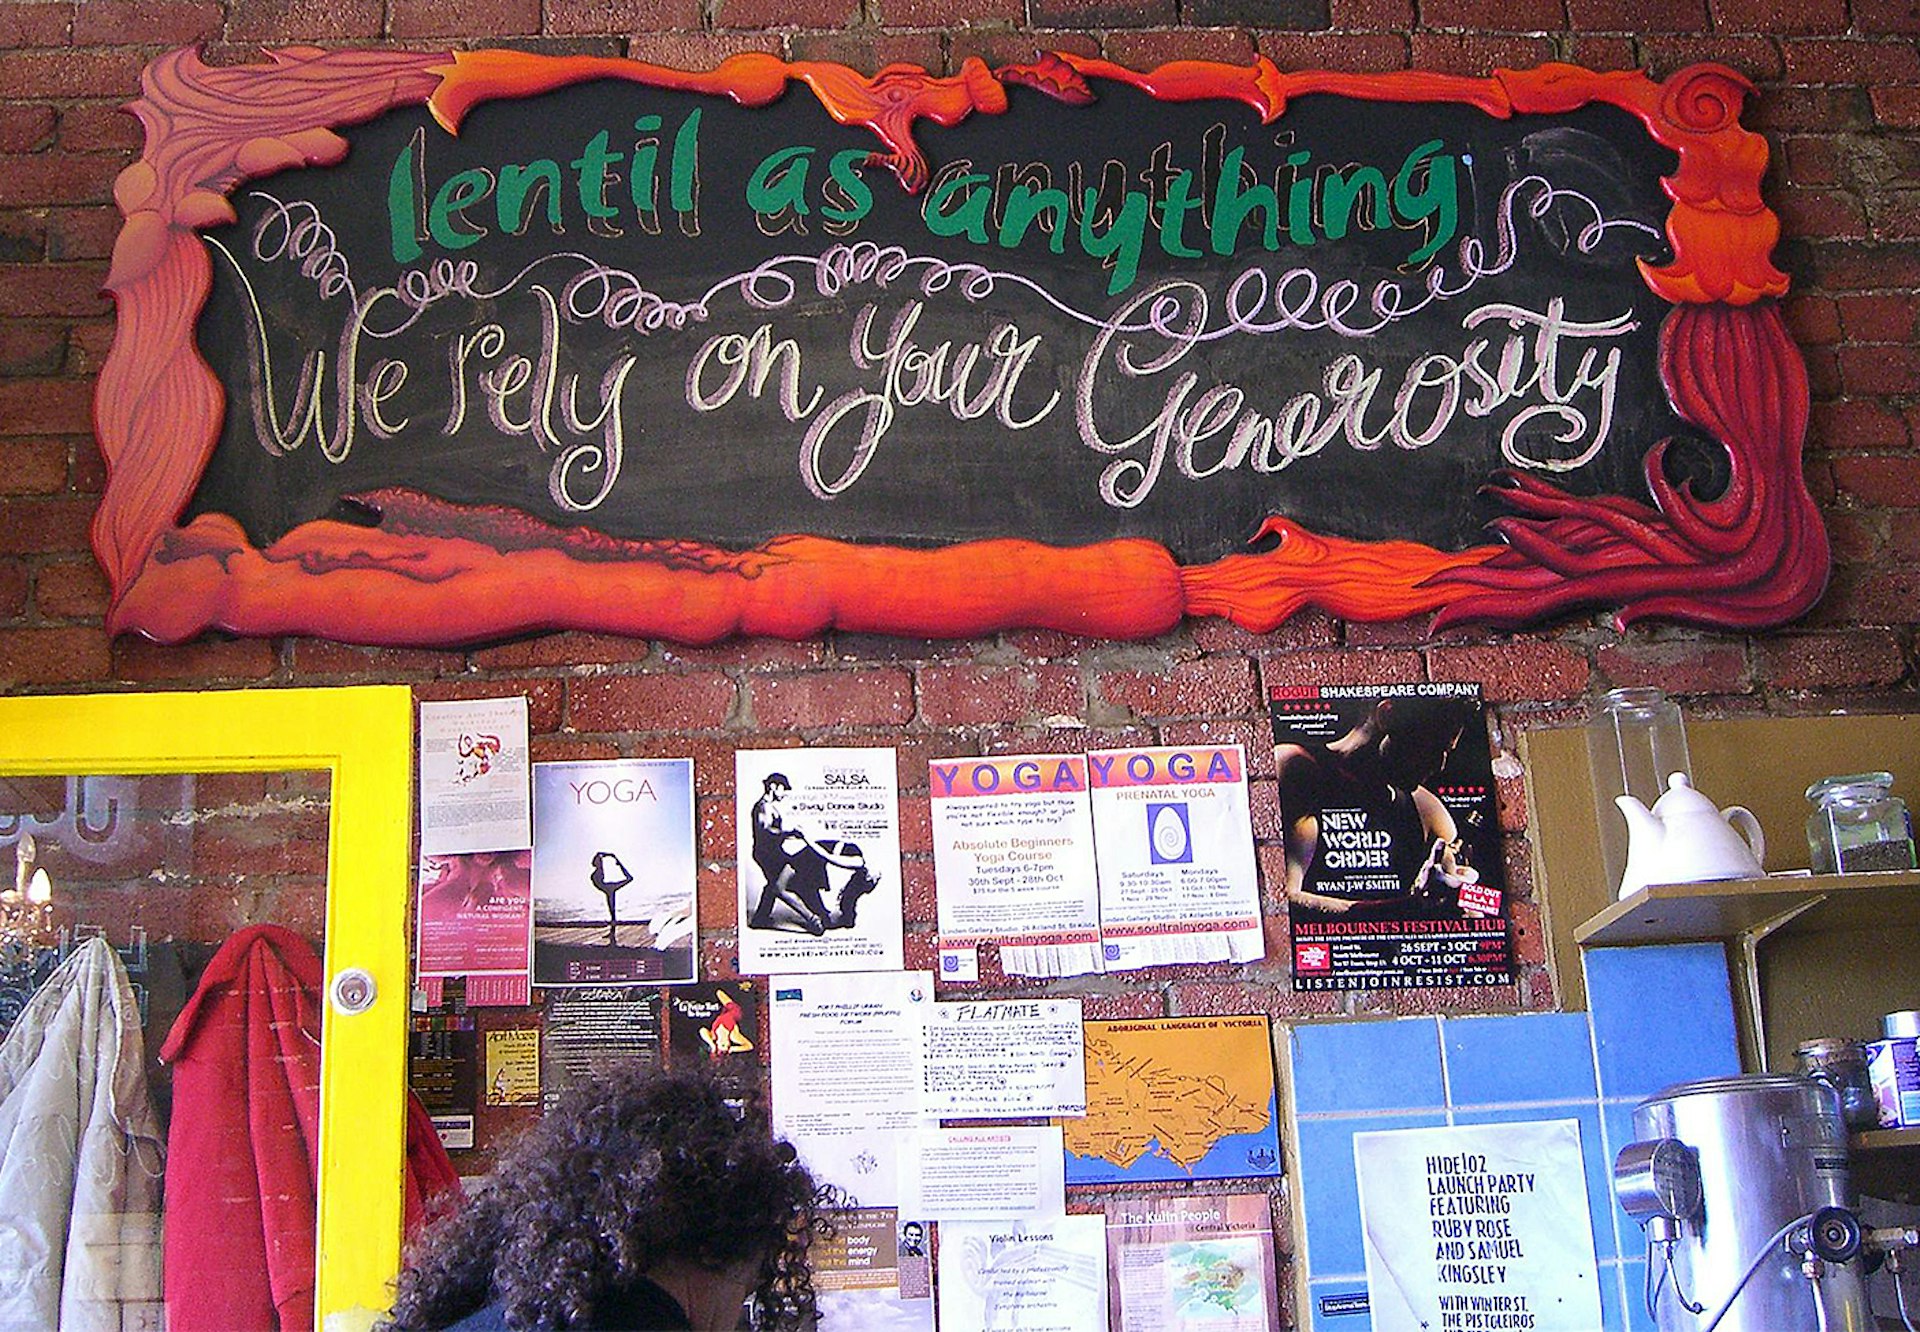 Pay according to your conscience in Lentil as Anything, the Melbourne veggie cafe that's now landed in Sydney. Image by Alpha / CC BY-SA 2.0